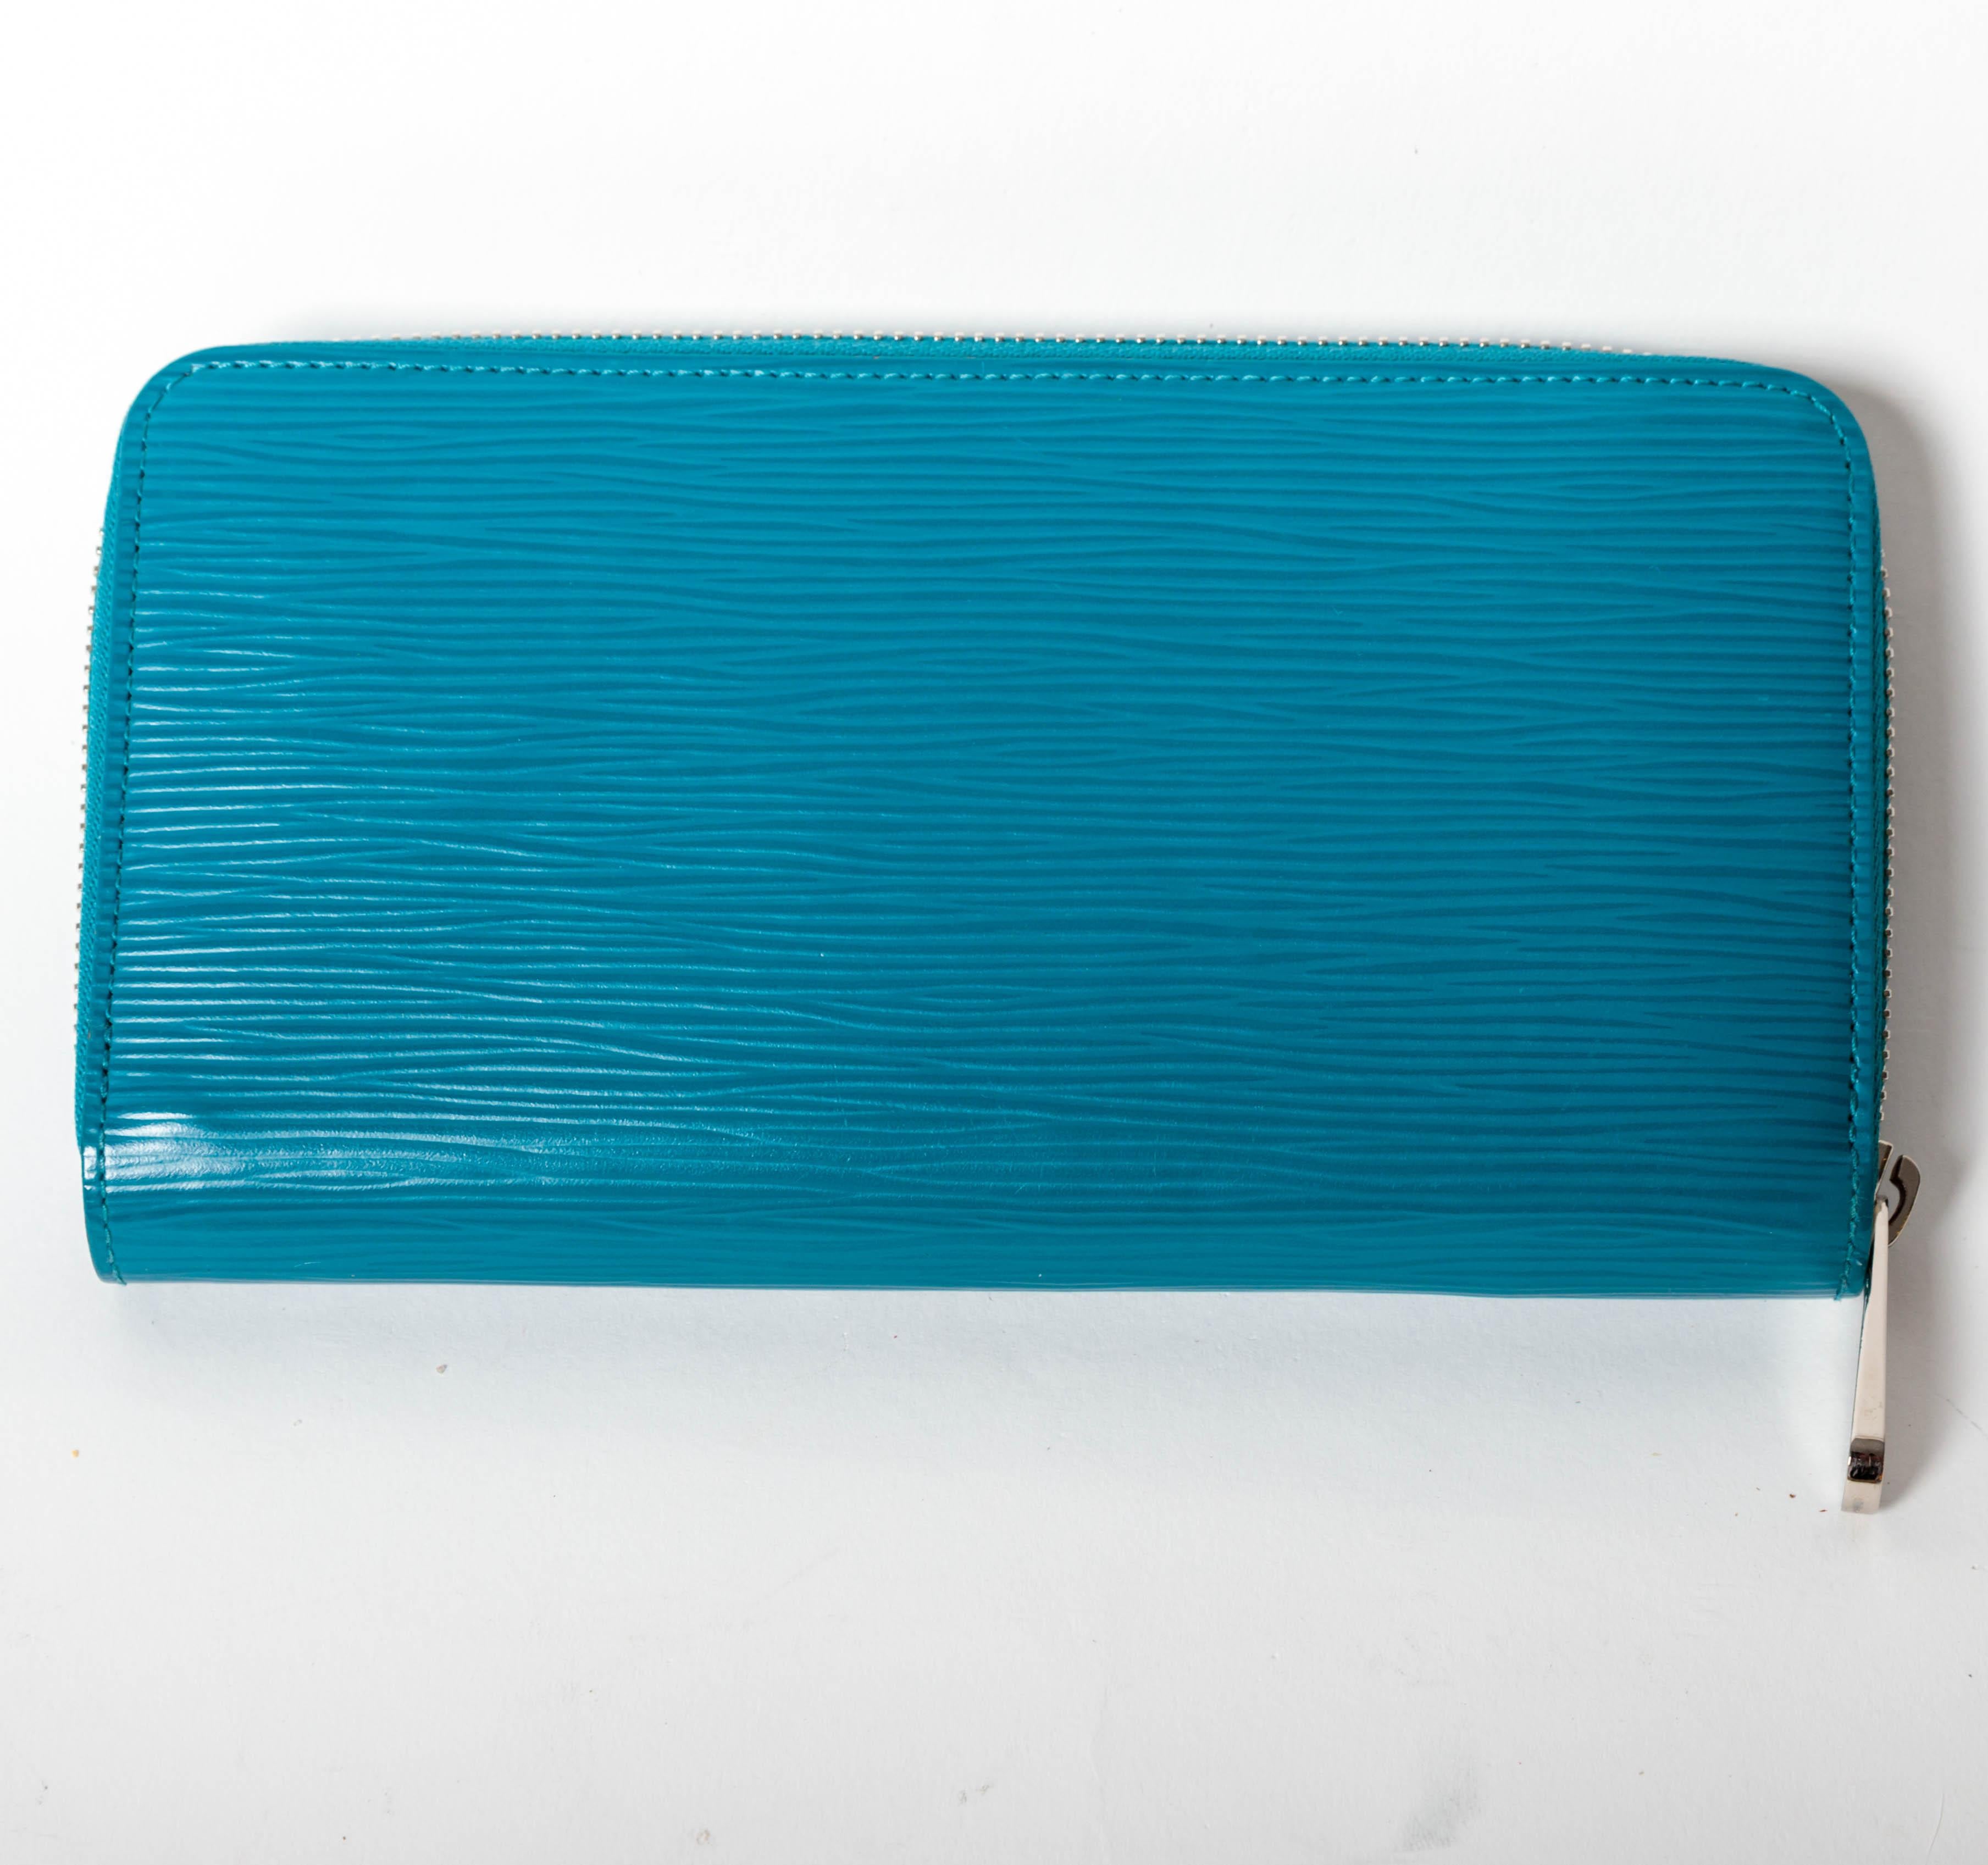 Louis Vuitton Cyan Leather Epi  Zippy Organizer Wallet  In Excellent Condition For Sale In Westhampton Beach, NY